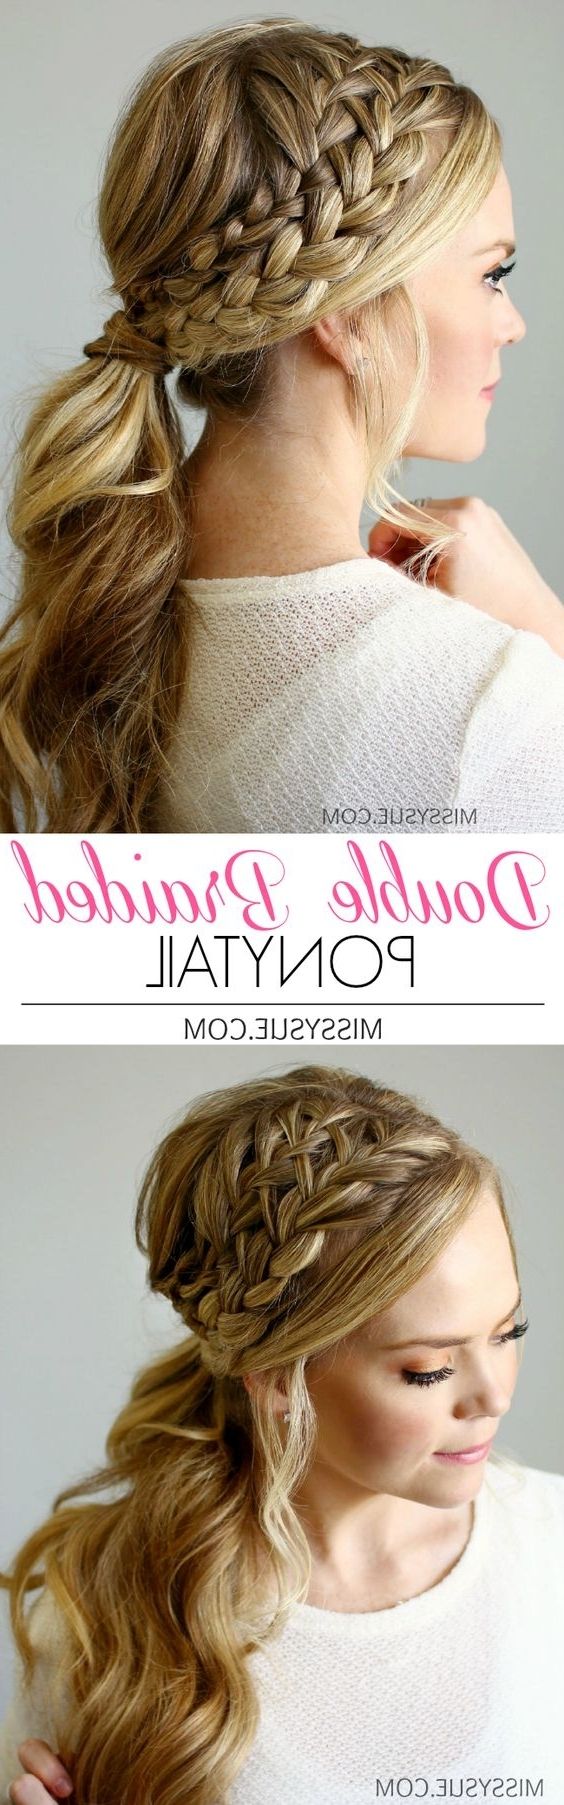 30 Simple Easy Ponytail Hairstyles For Lazy Girls – Ponytail Ideas 2018 Within Trendy High And Glossy Brown Blonde Pony Hairstyles (Gallery 15 of 20)